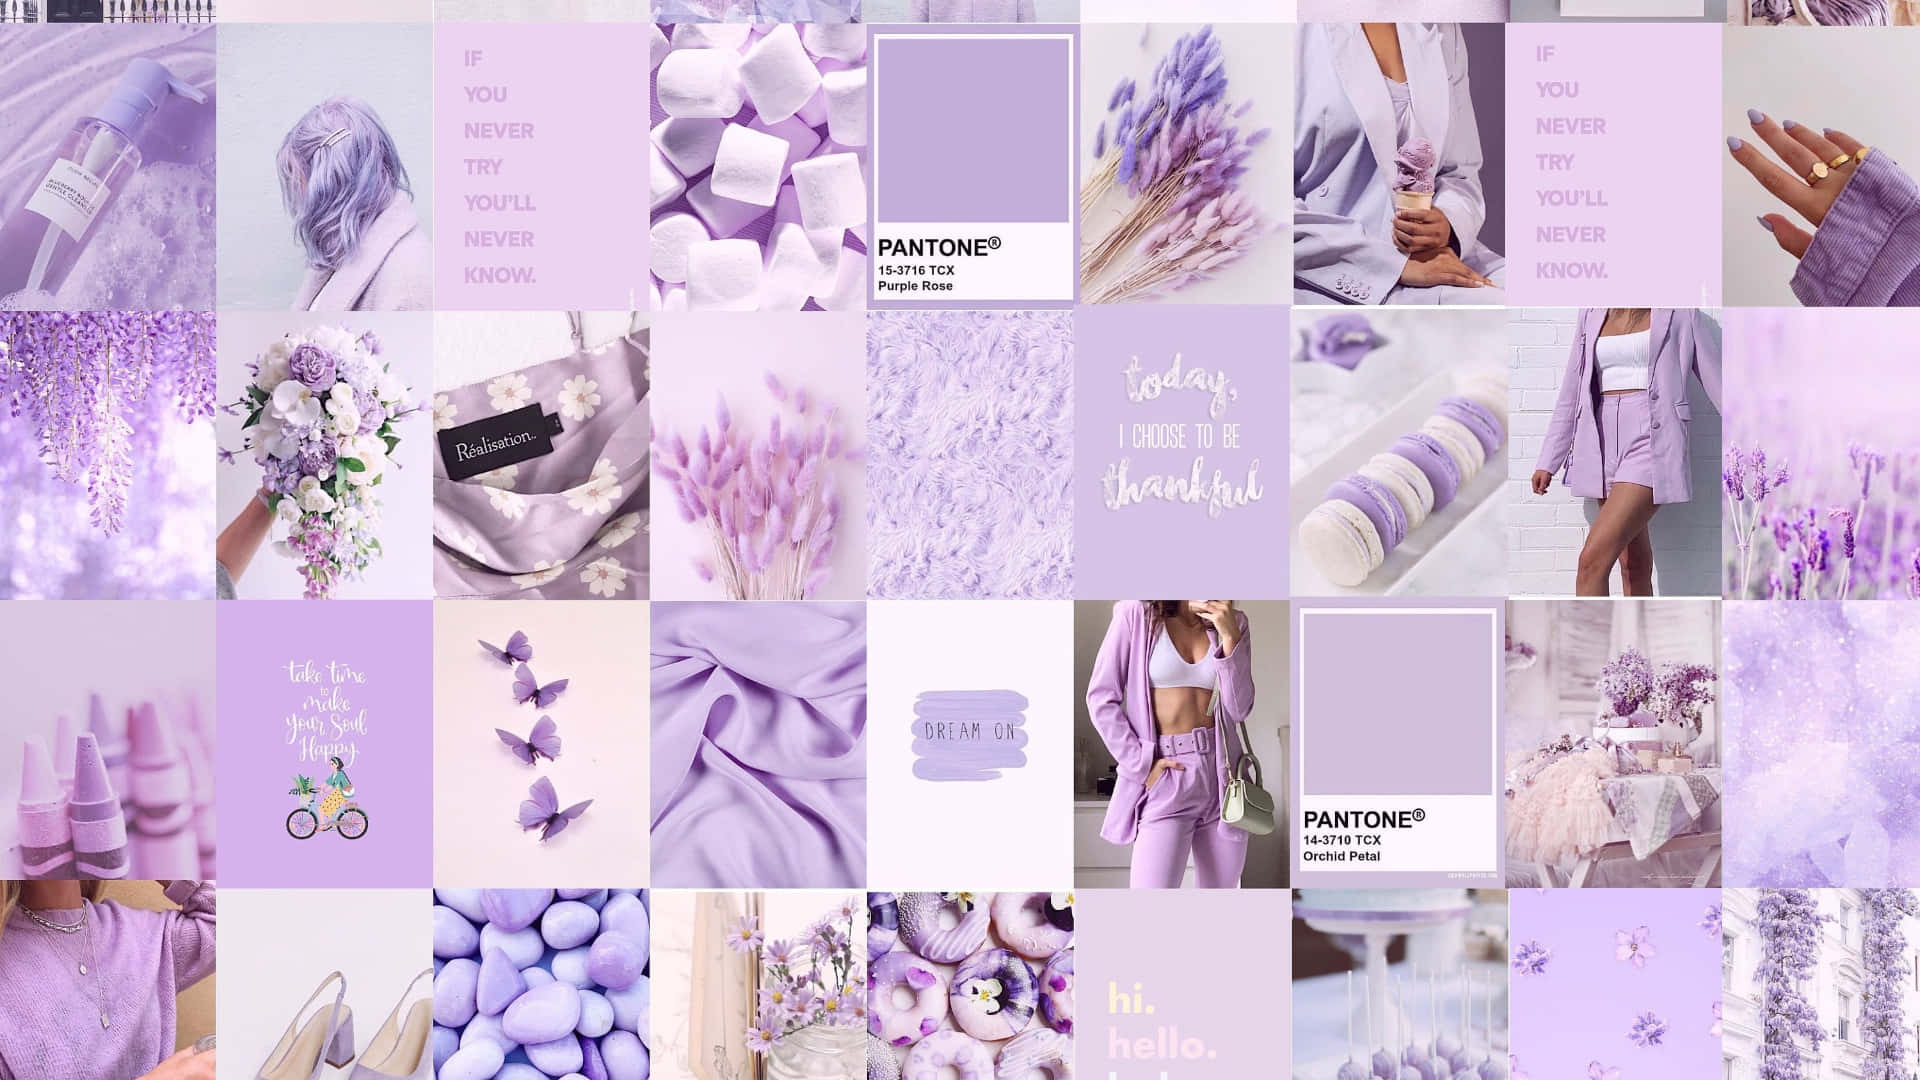 AR on Twitter  Lilac lilac aesthetic wallpaper  httpstcokzSEIPGVzC  Twitter